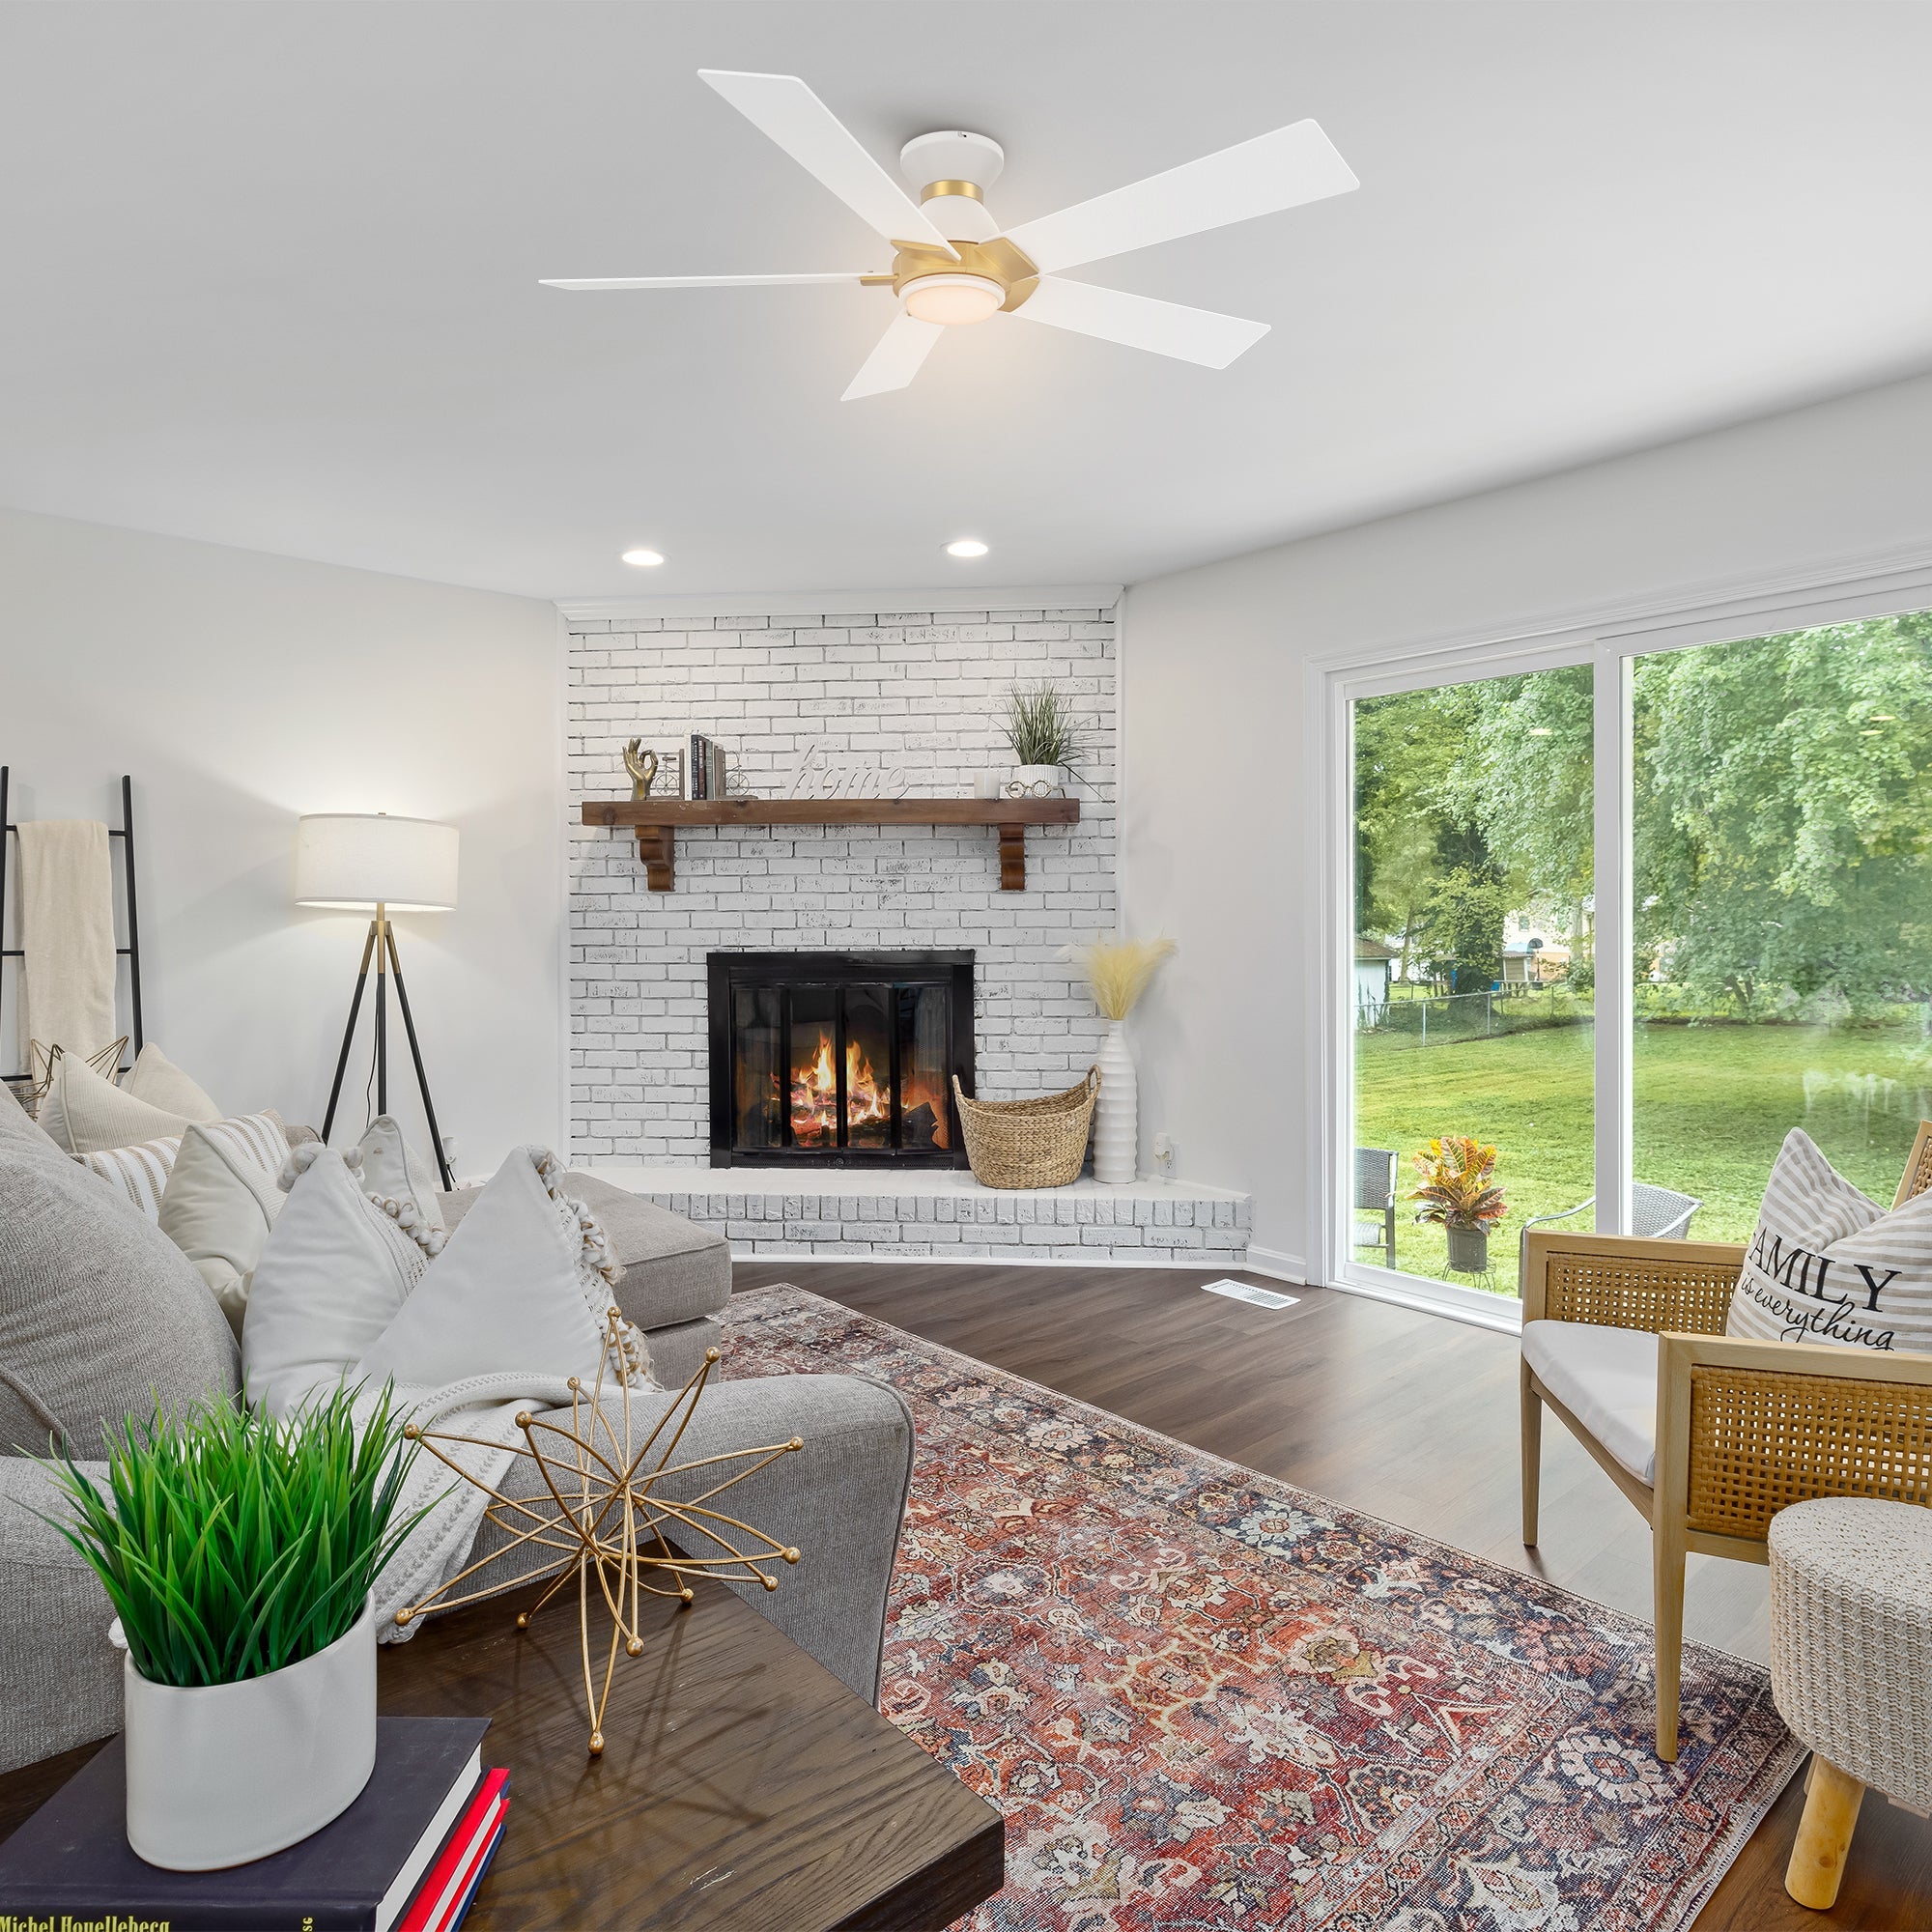 This Aspen 48&#39;&#39; smart ceiling fan keeps your space cool, bright, and stylish. It is a soft modern masterpiece perfect for your large indoor living spaces. This Wifi smart ceiling fan is a simplicity designing with White finish, use elegant Plywood blades and has an integrated 4000K LED cool light. The fan features Remote control, Wi-Fi apps, Siri Shortcut and Voice control technology (compatible with Amazon Alexa and Google Home Assistant ) to set fan preferences. 